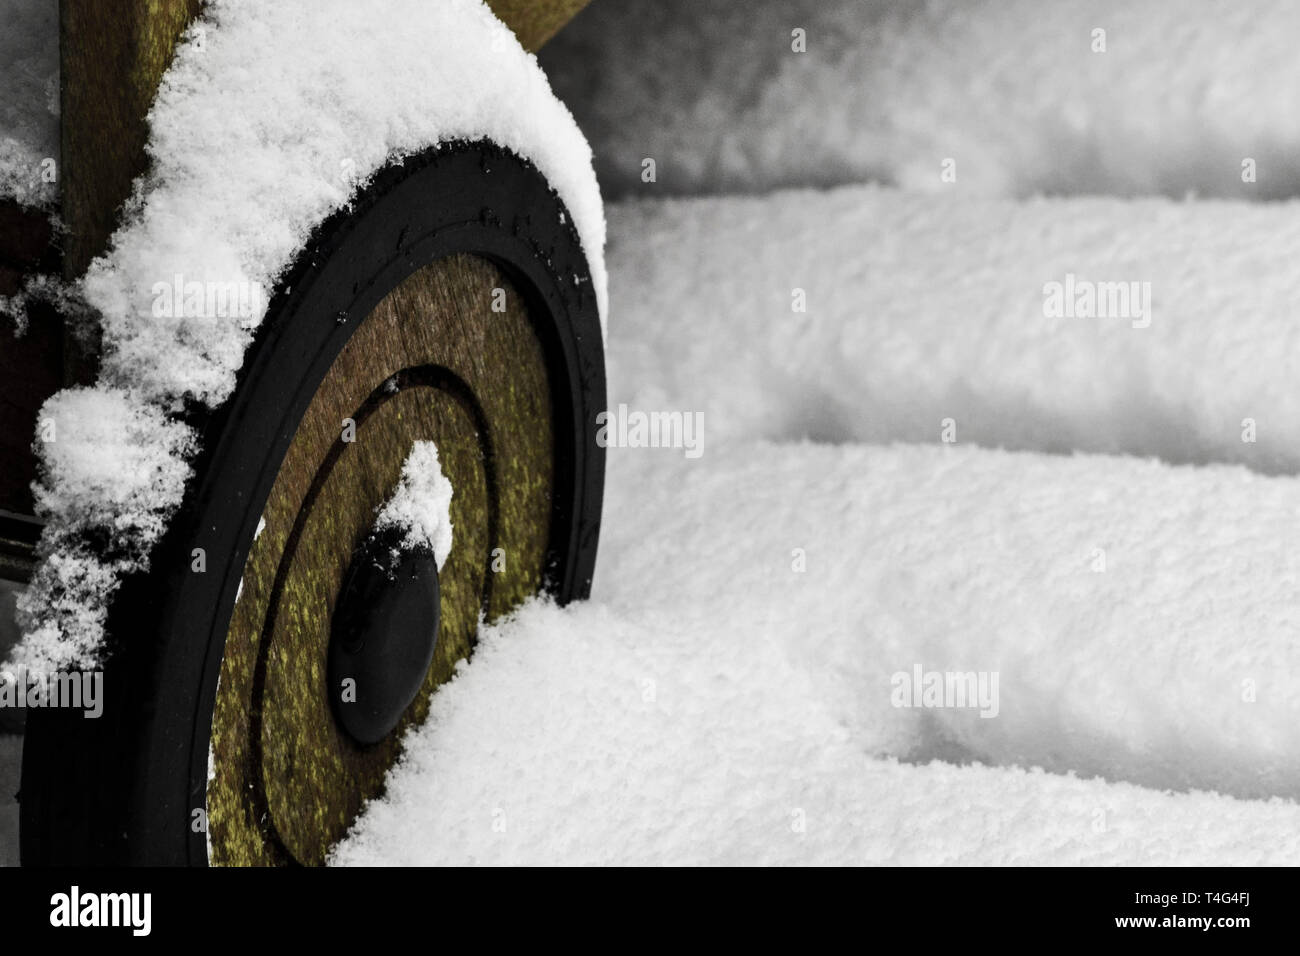 close up of snow settling on a wooden wheel of a cart Stock Photo